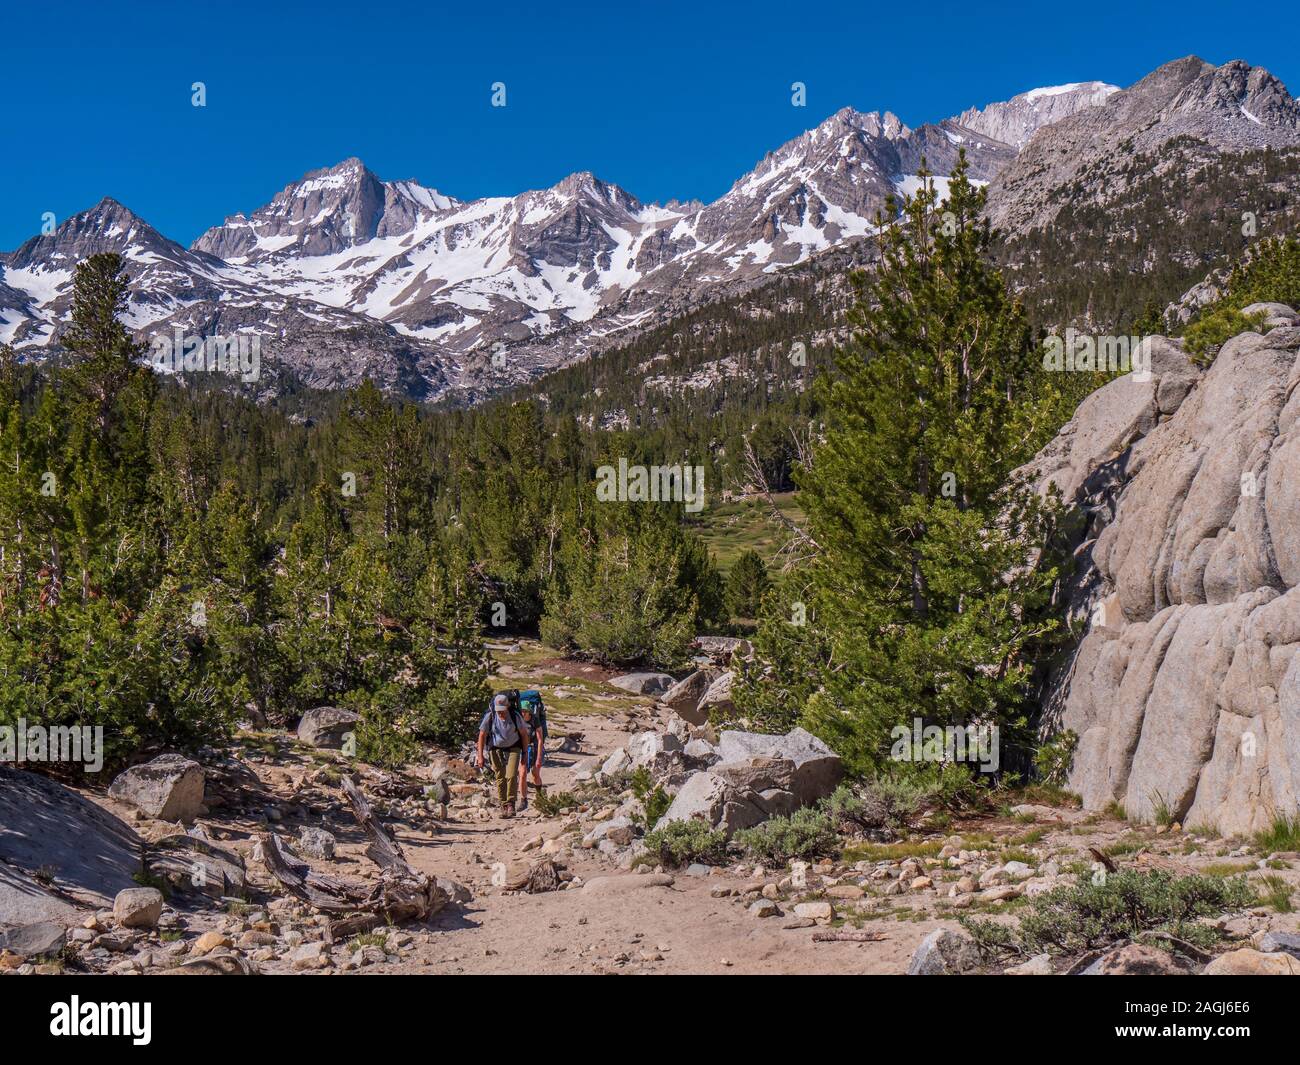 Backpackers escursionismo fino ai laghi Valley Trail, John Muir Wilderness, Inyo National Forest, California. Foto Stock